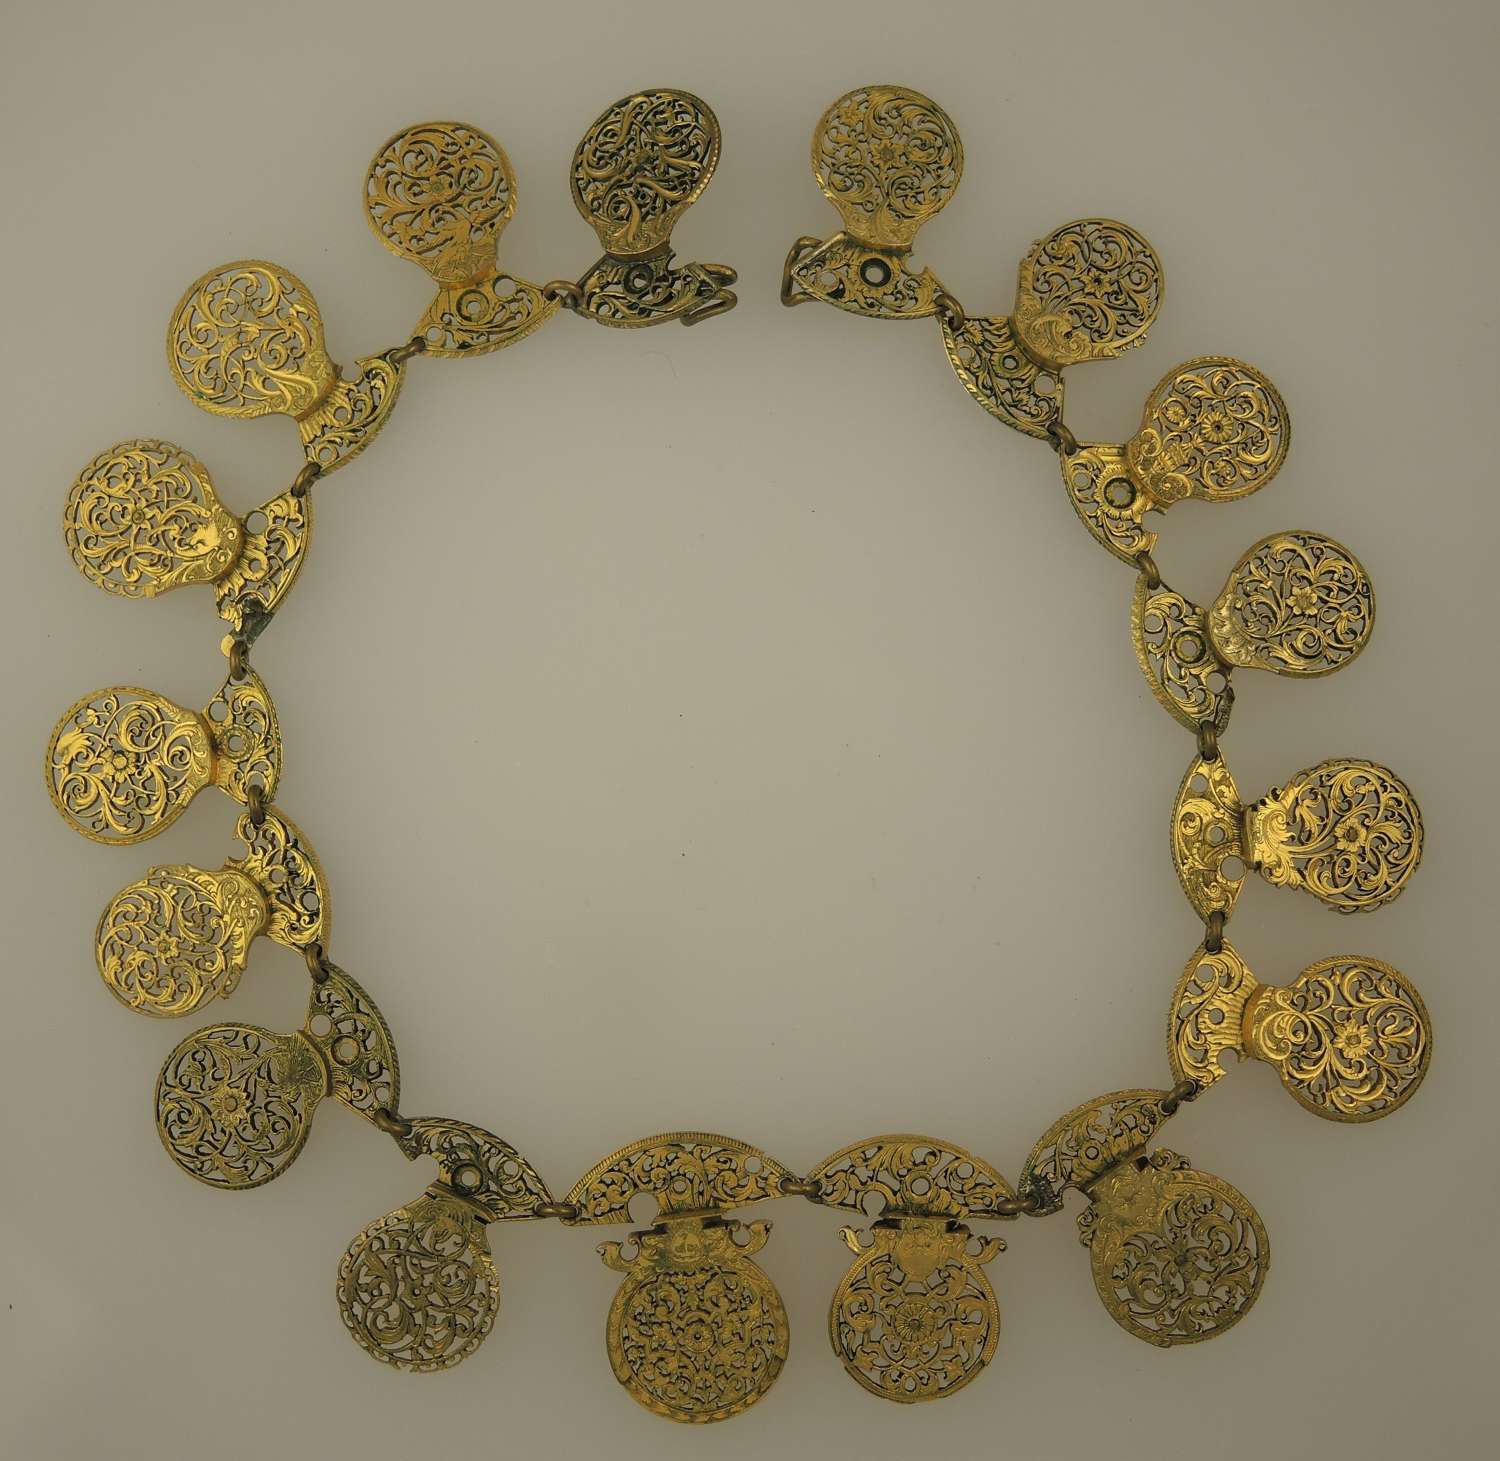 Lot of 17 watch-cocks in the form of a necklace c1720-1810